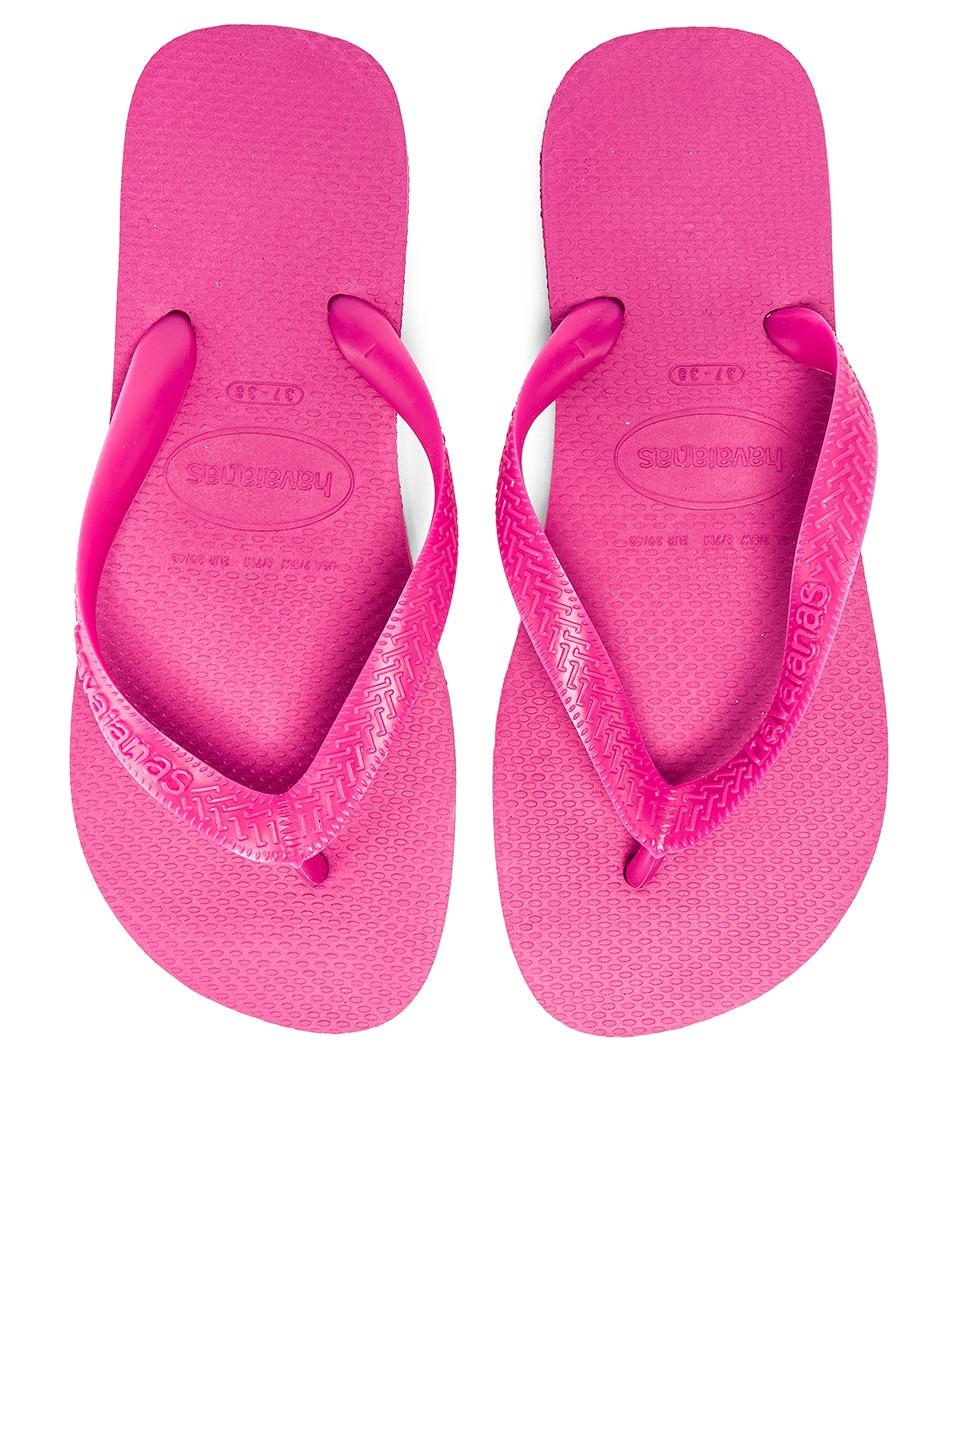 Havaianas Top Sandal in Hollywood Rose | REVOLVE